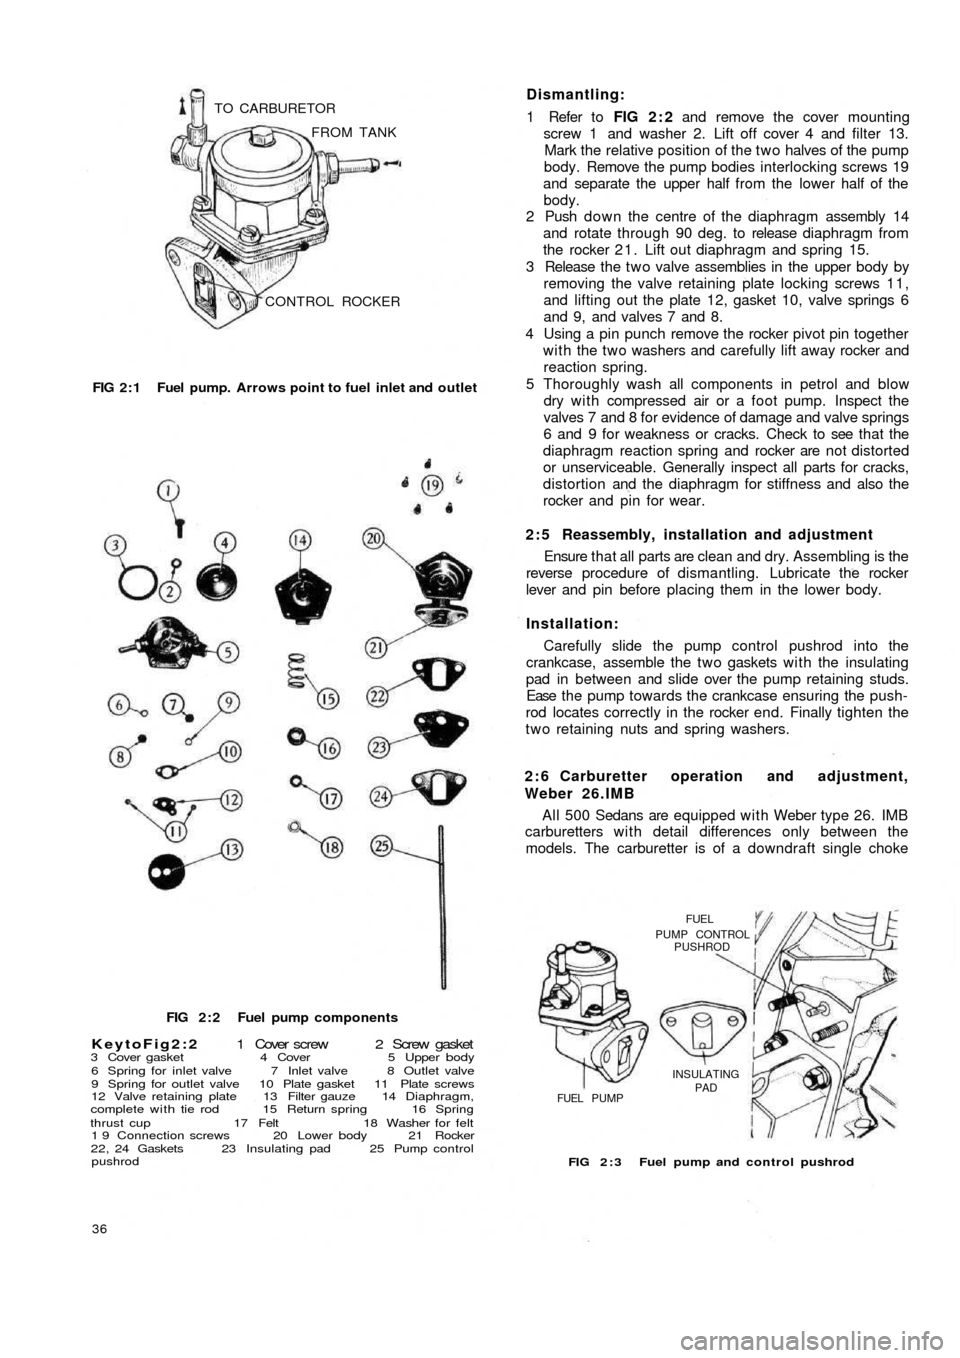 FIAT 500 1968 1.G Workshop Manual CONTROL ROCKER FROM TANK TO CARBURETOR
FIG 2 : 1  Fuel pump. Arrows point to fuel  inlet and outlet
FIG 2 : 2  Fuel pump components
KeytoFig2:2 1  Cover  screw  2  Screw  gasket3 Cover gasket 4 Cover 